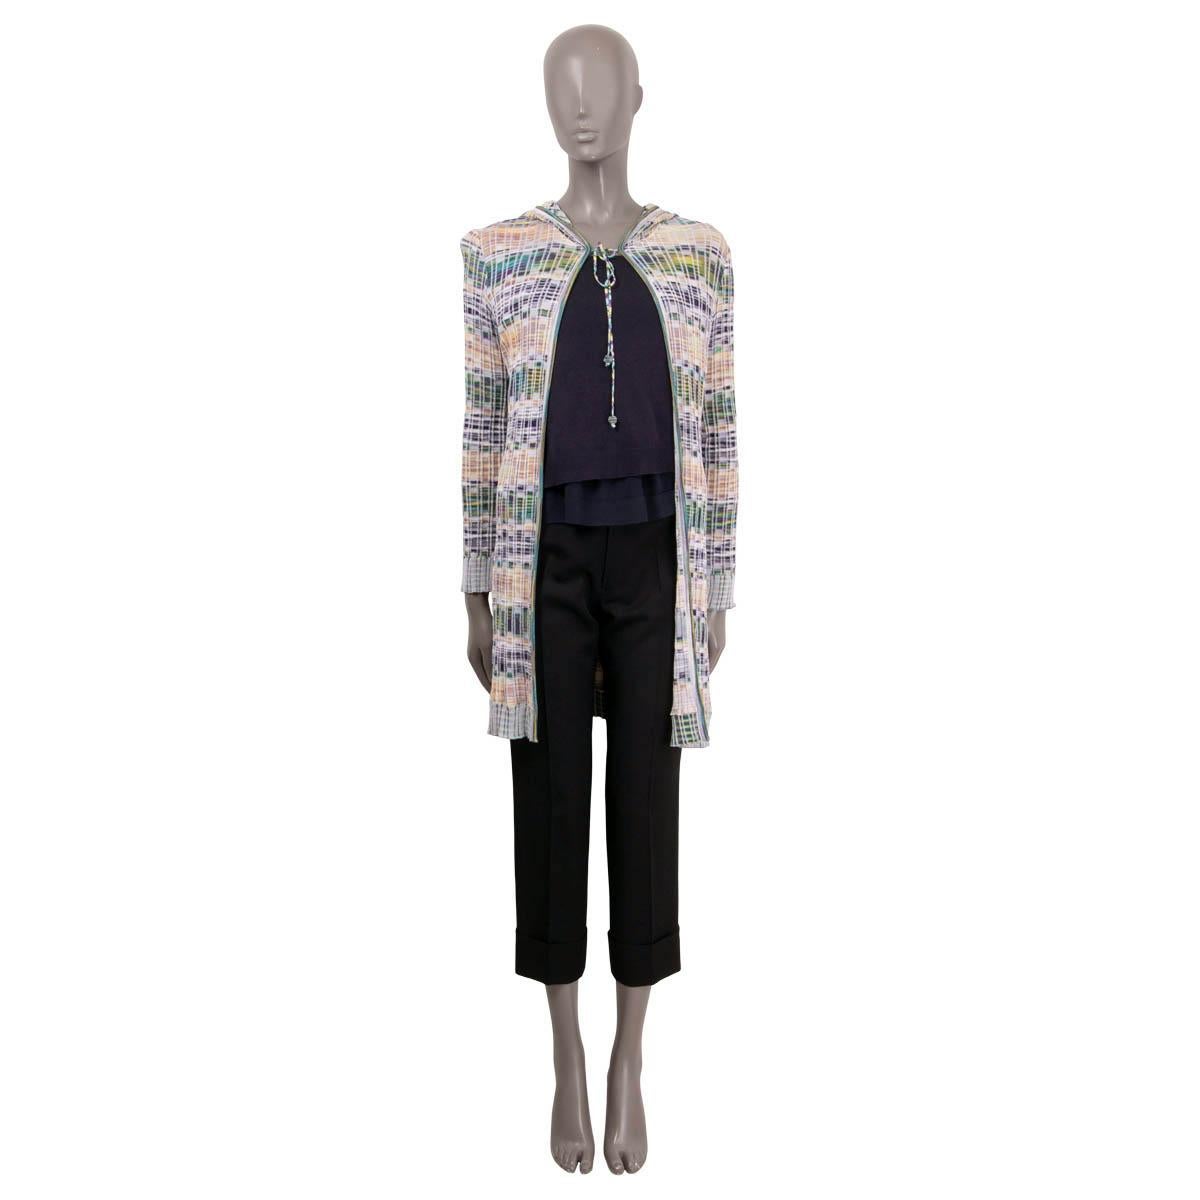 100% authentic Missoni knit cardigan in stretchy light blue, pink, white and yellow viscose (97%) and polyester (3%). Features a hood in similar pattern and opens with strangles around the neckline in the front. Has been worn and is overall in very